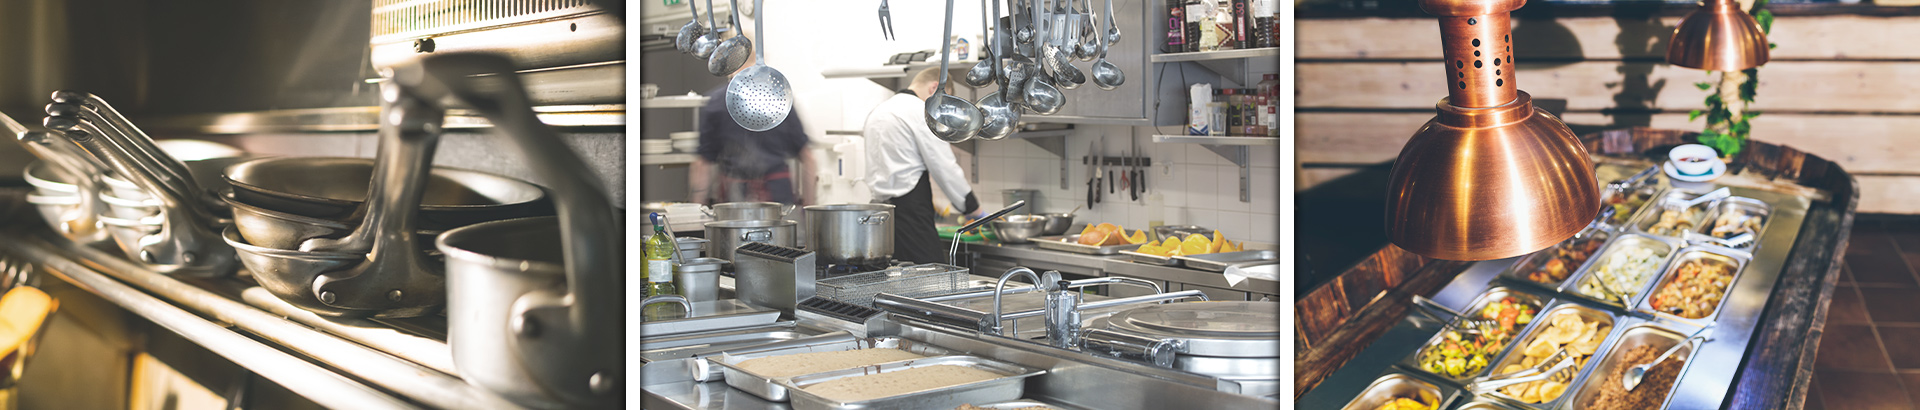 Bolton & Hay Foodservice Equipment & Supplies